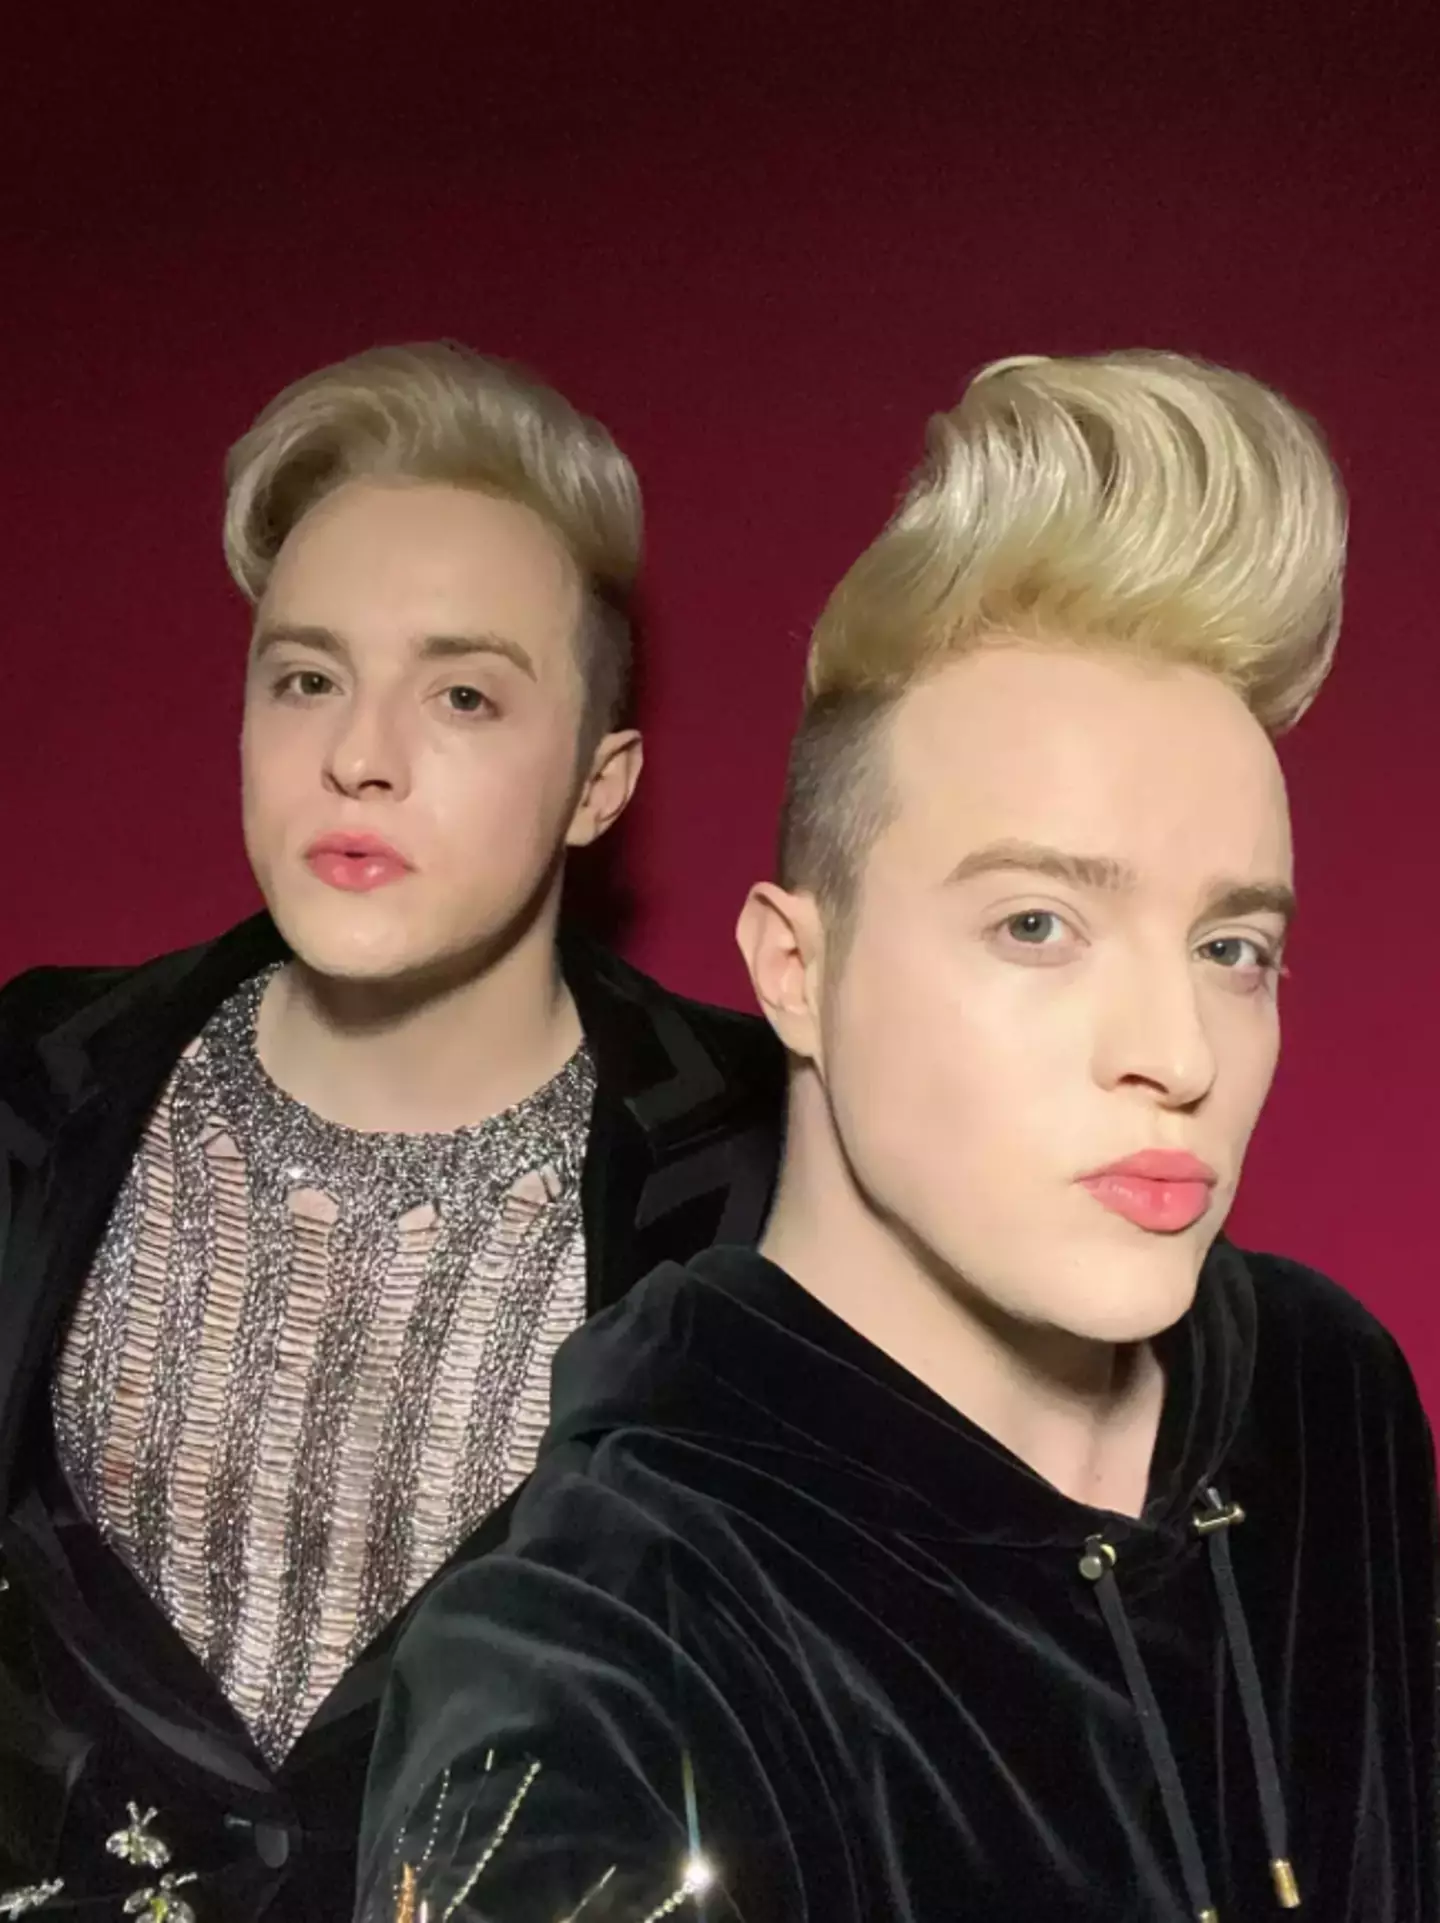 Jedward have hit back at their former mentor.